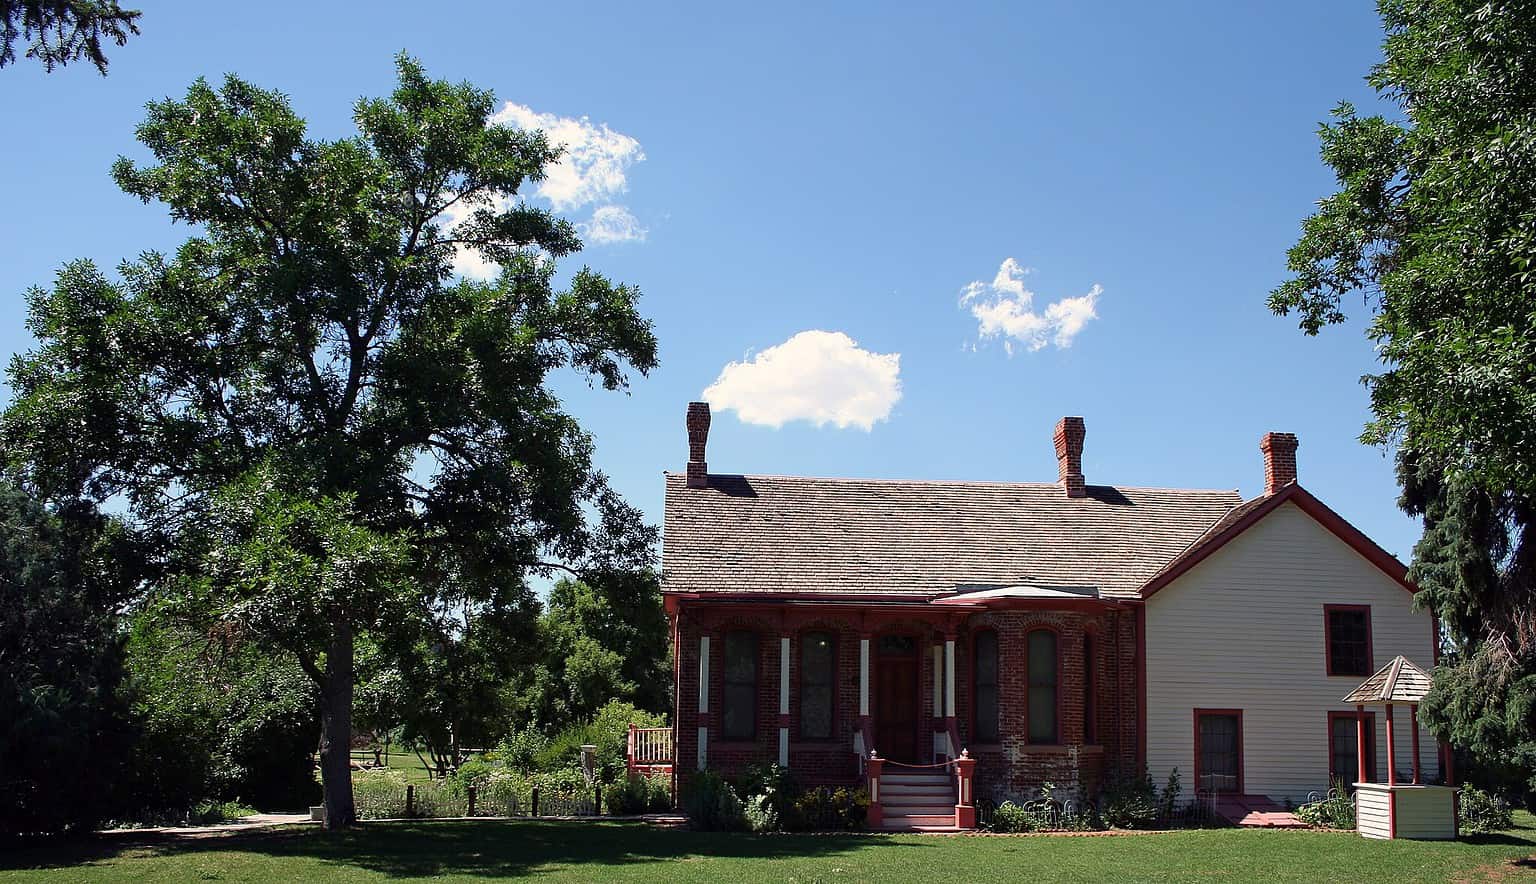 The Oldest House in Colorado Is More Than 164 Years Old - A-Z Animals